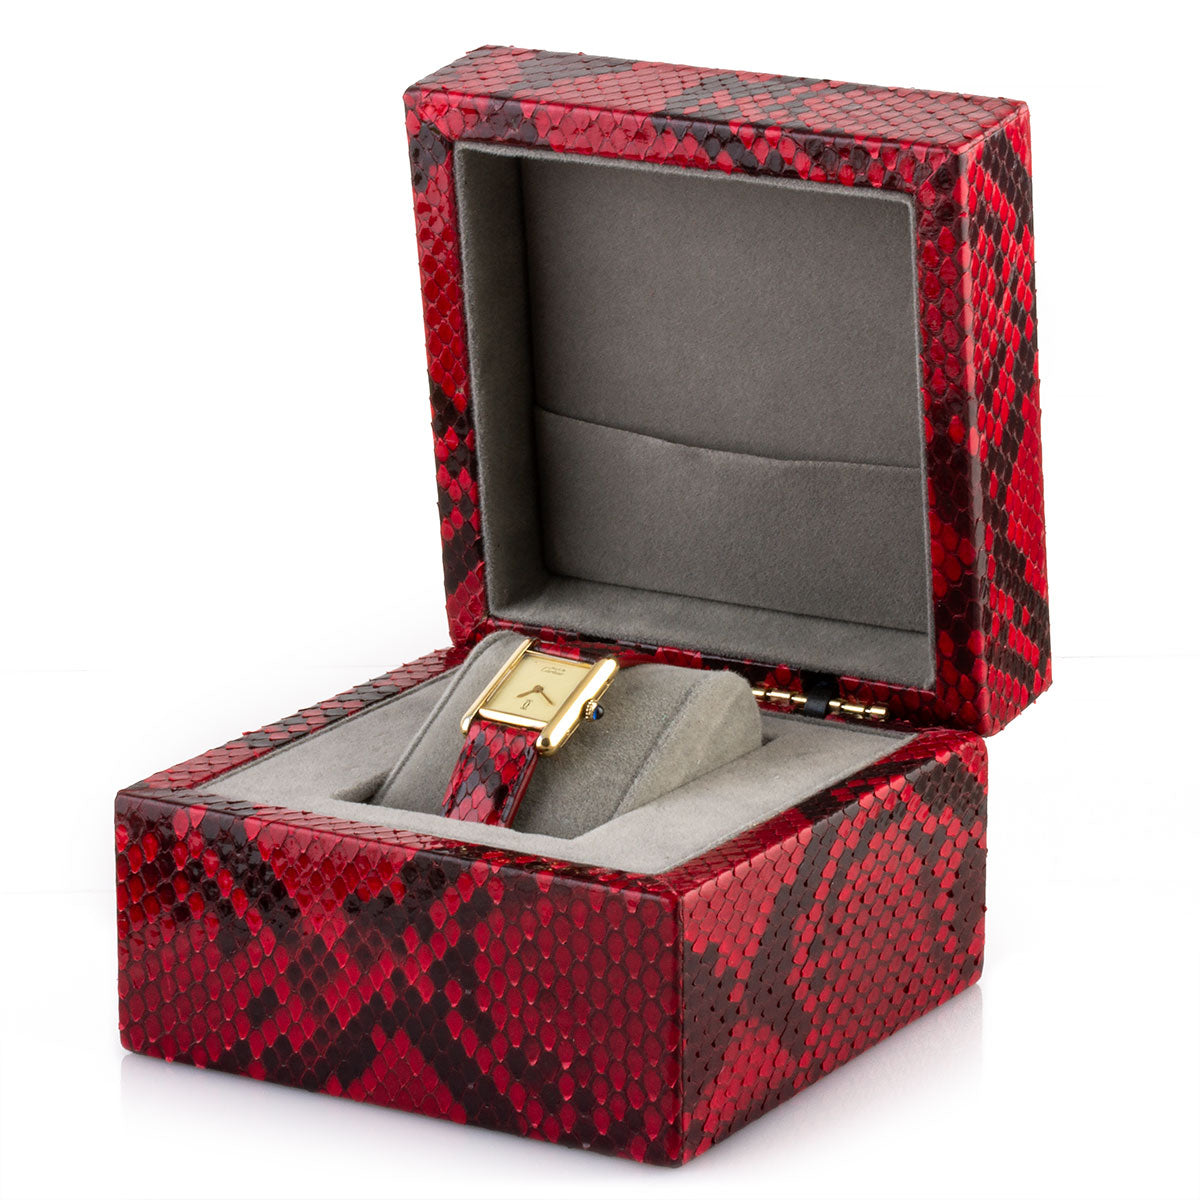 Leather watch box - Watch case for 1 watch - Red / black python